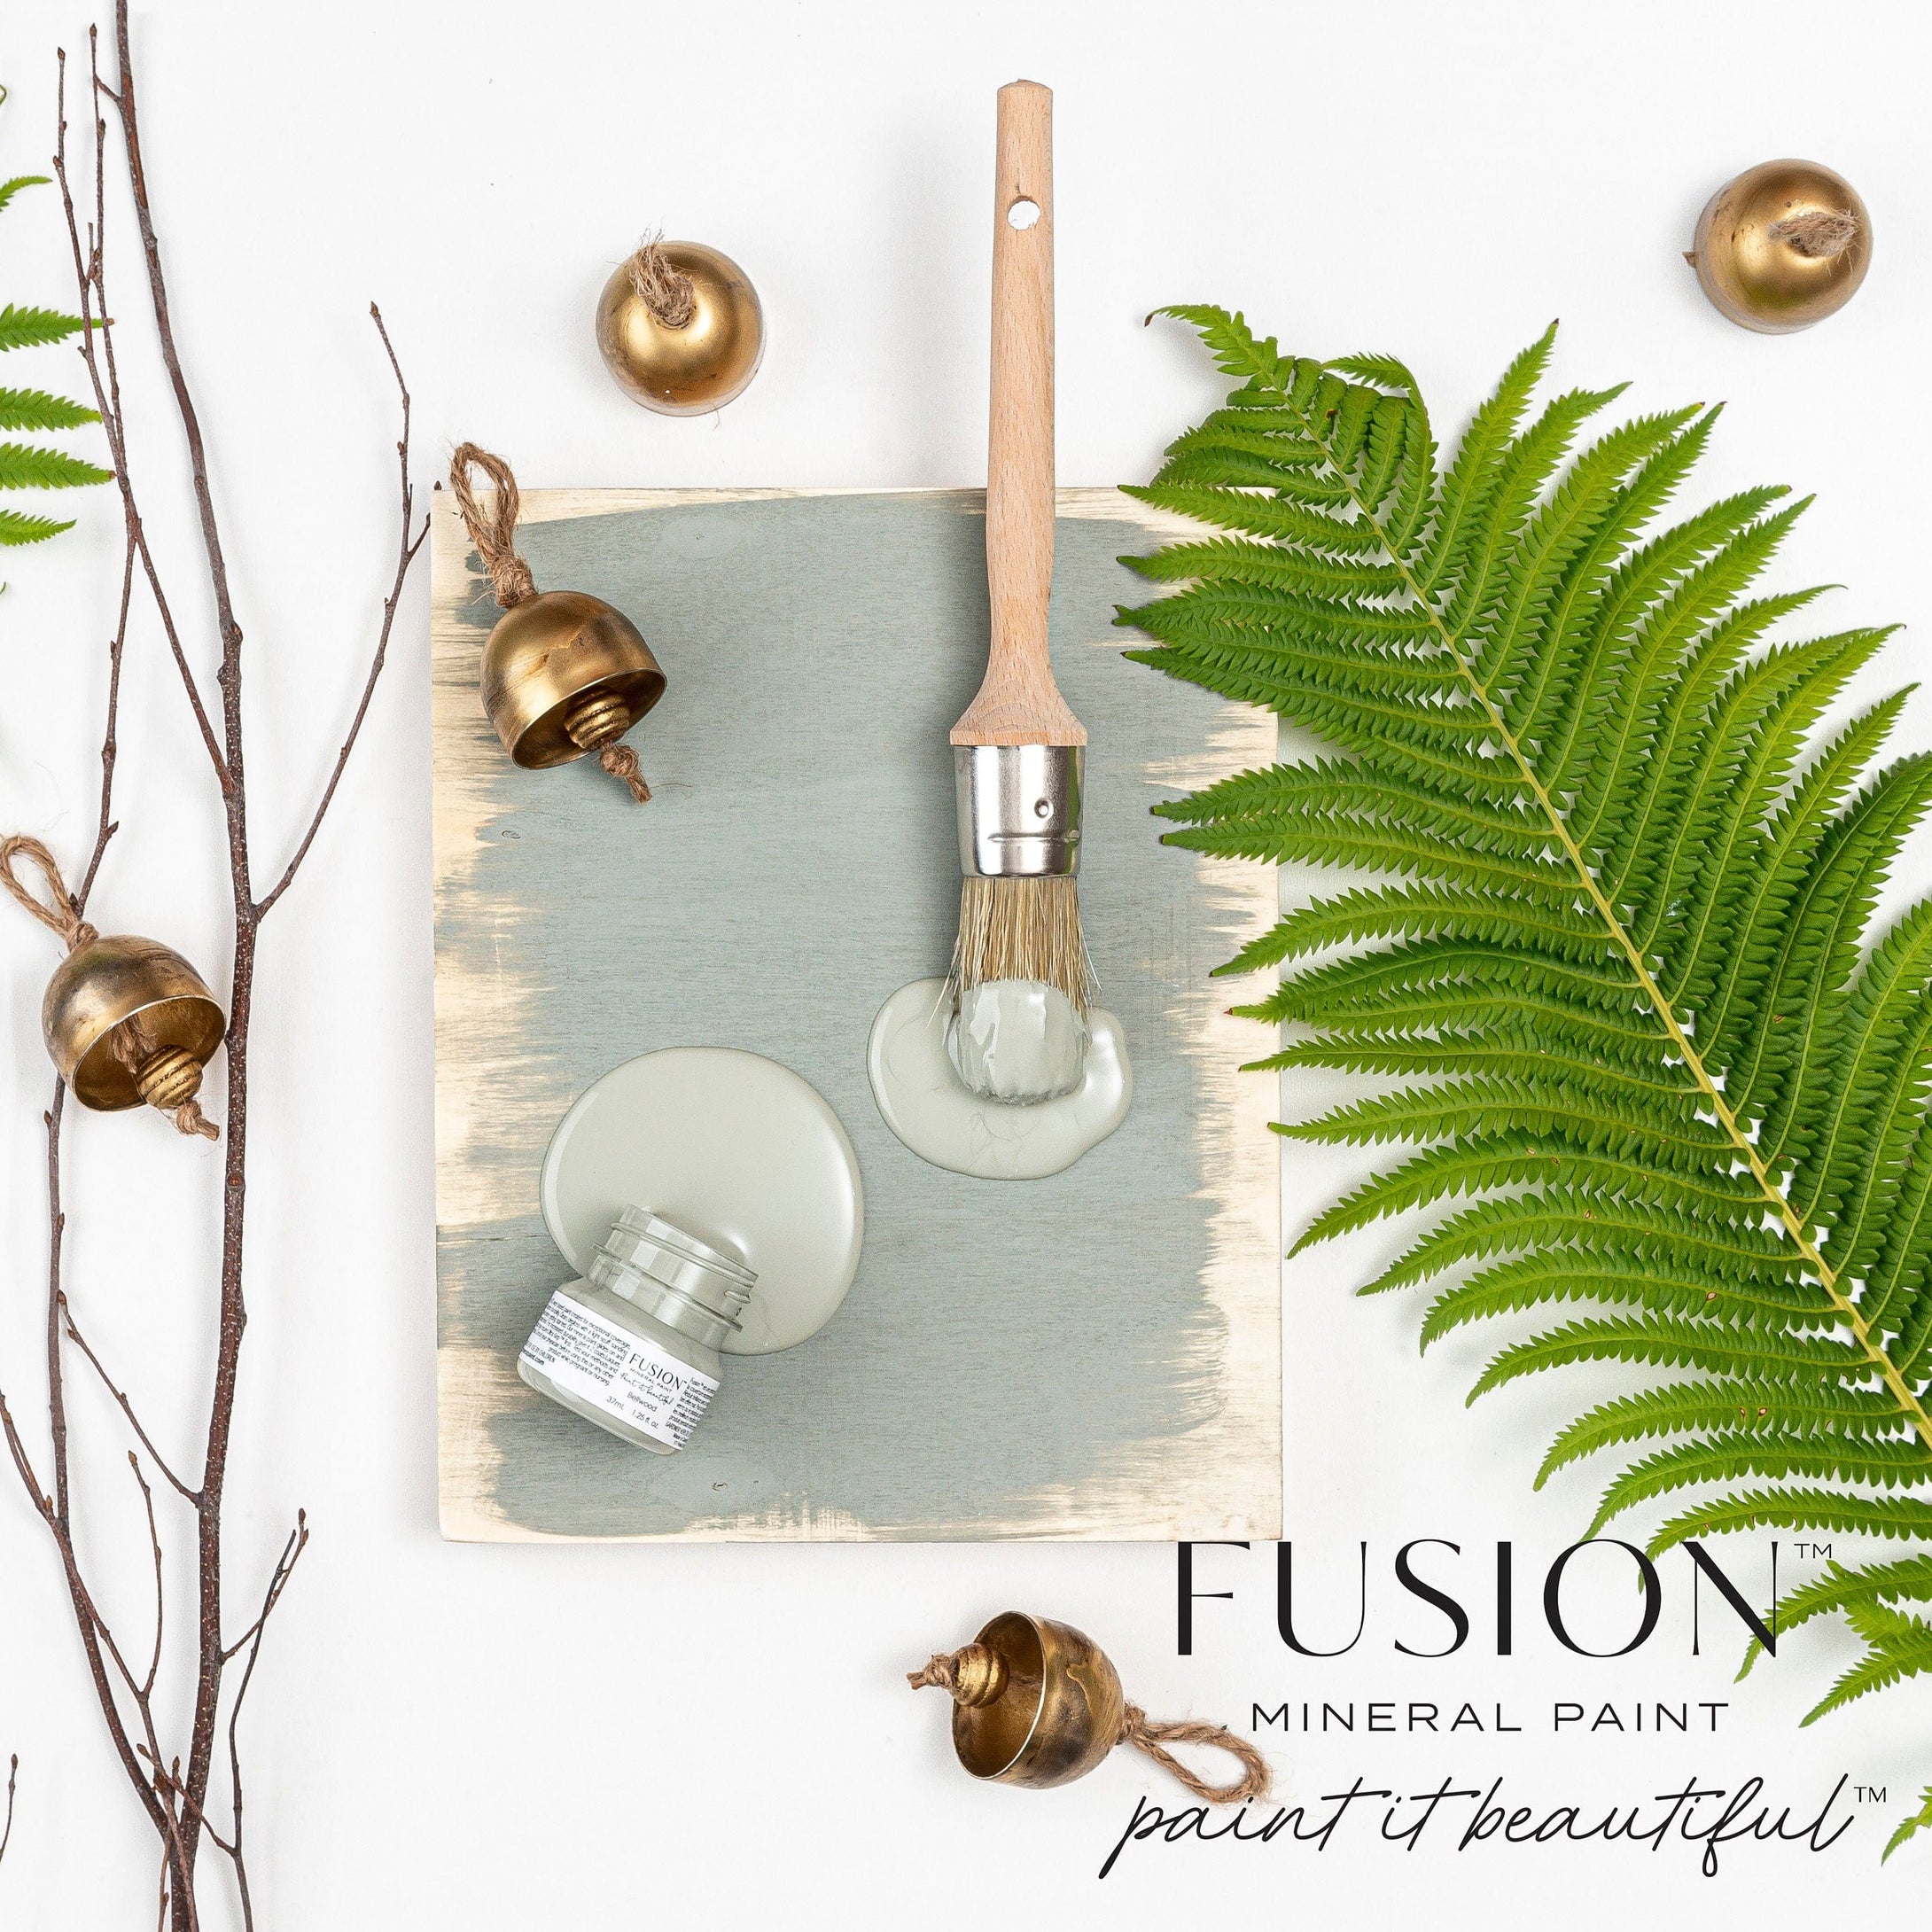 Fusion Fusion Mineral Paint Choose one Fusion Mineral Paint - Bellwood